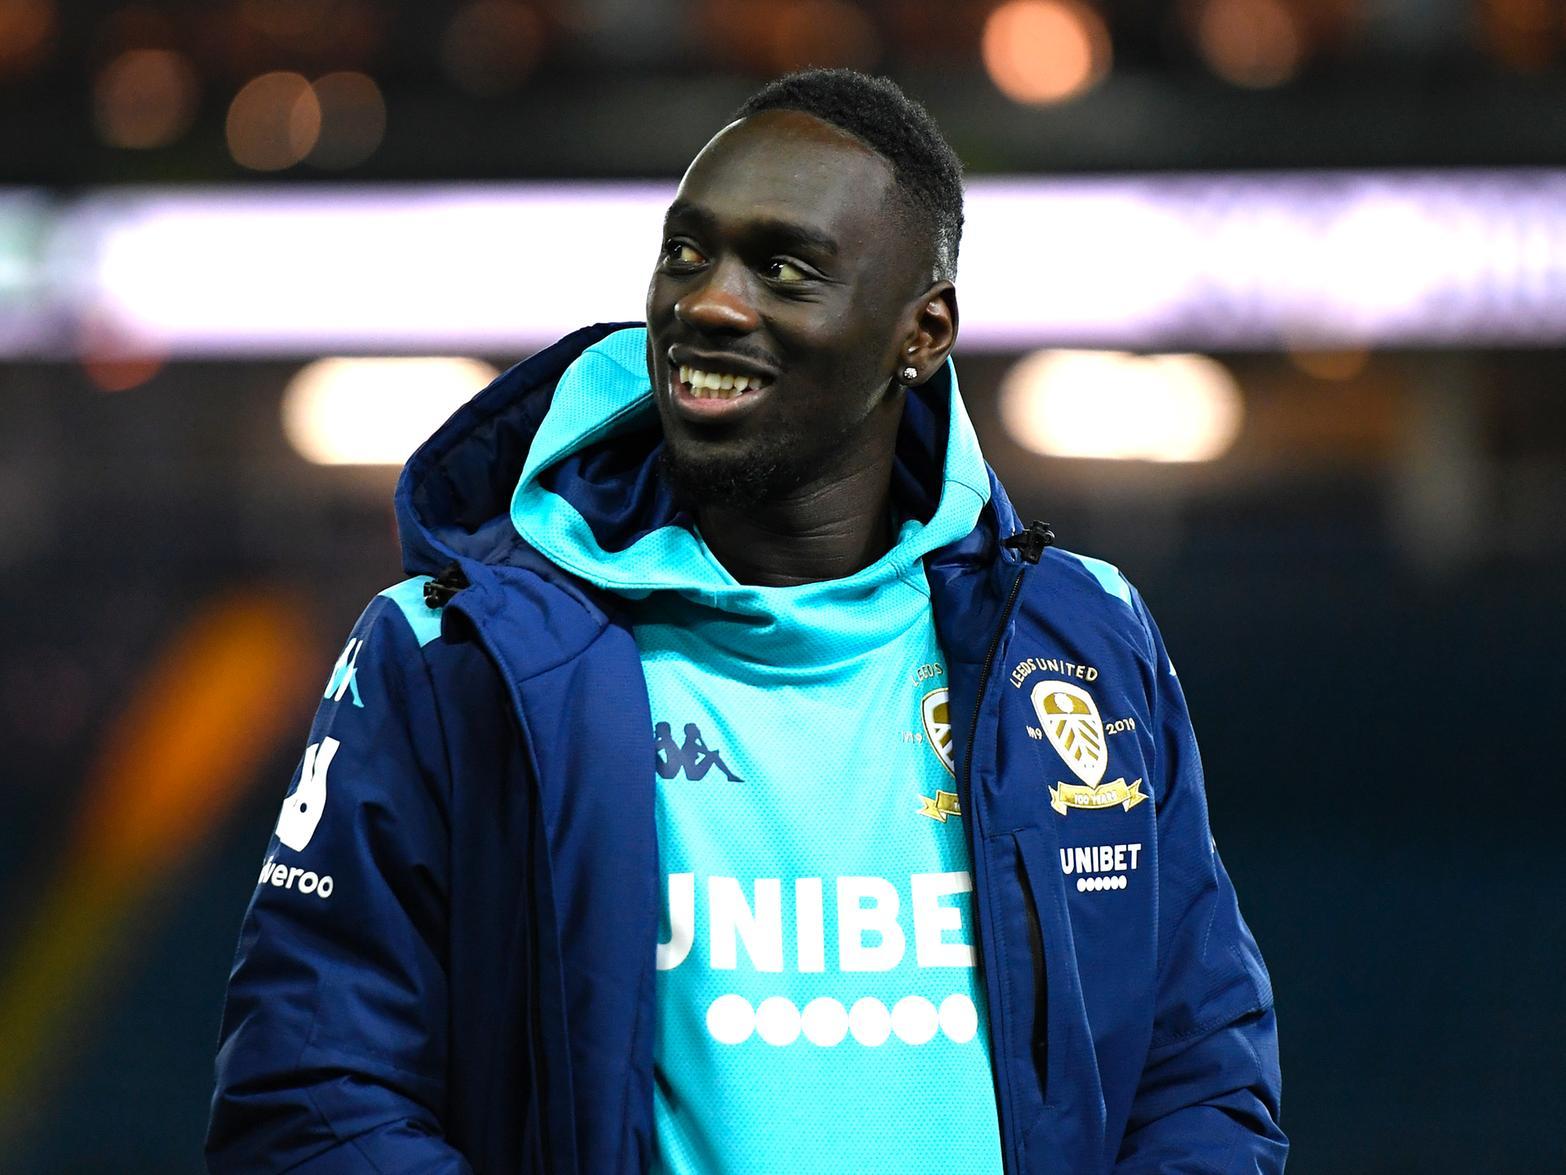 Leeds boss Marcelo Bielsa has claimed that, on his day, loan signing Jean-Kevin Augustin is a player worth "30m-40m", but has hinted that he may not make his debut against Nottingham Forest this weekend. (Yorkshire Evening Post)